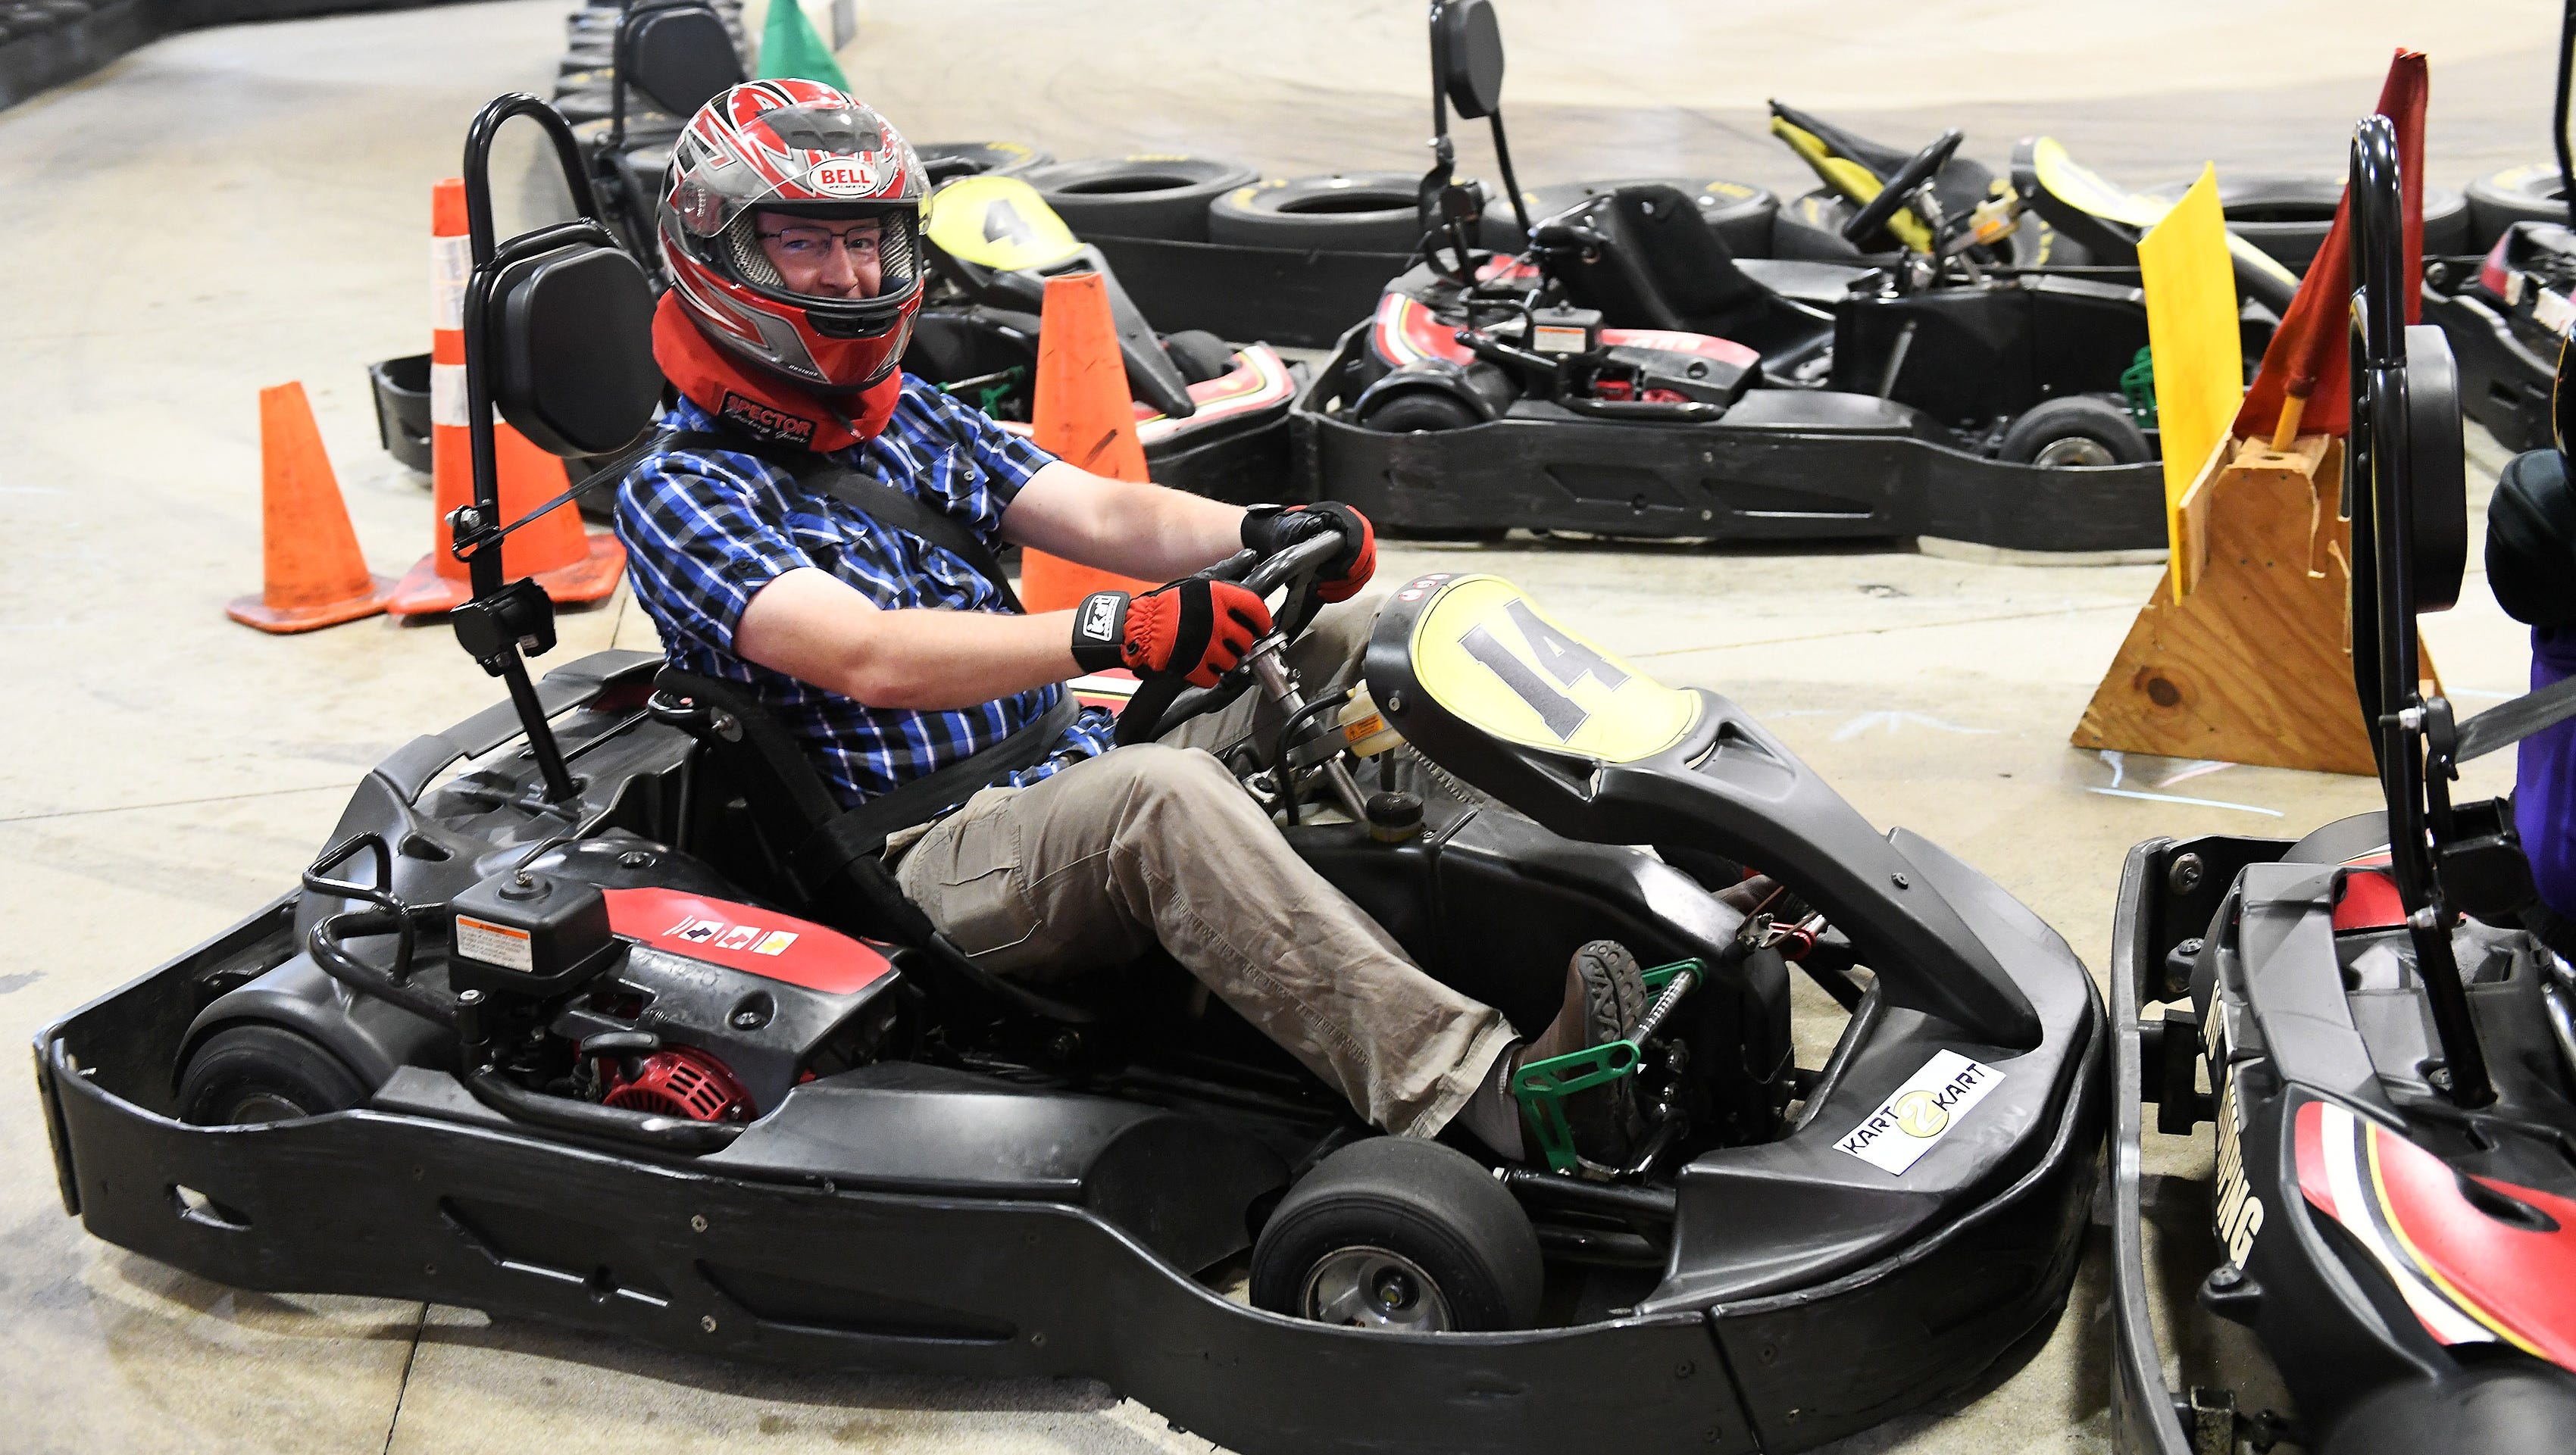 Geoff Guthrie of St. Ignace, son of Doug Guthrie, gets ready for his qualifying run during the Doug Guthrie Memorial Media Karting Challenge on Tuesday, May 29, 2018, at Kart2Kart in Sterling Heights.